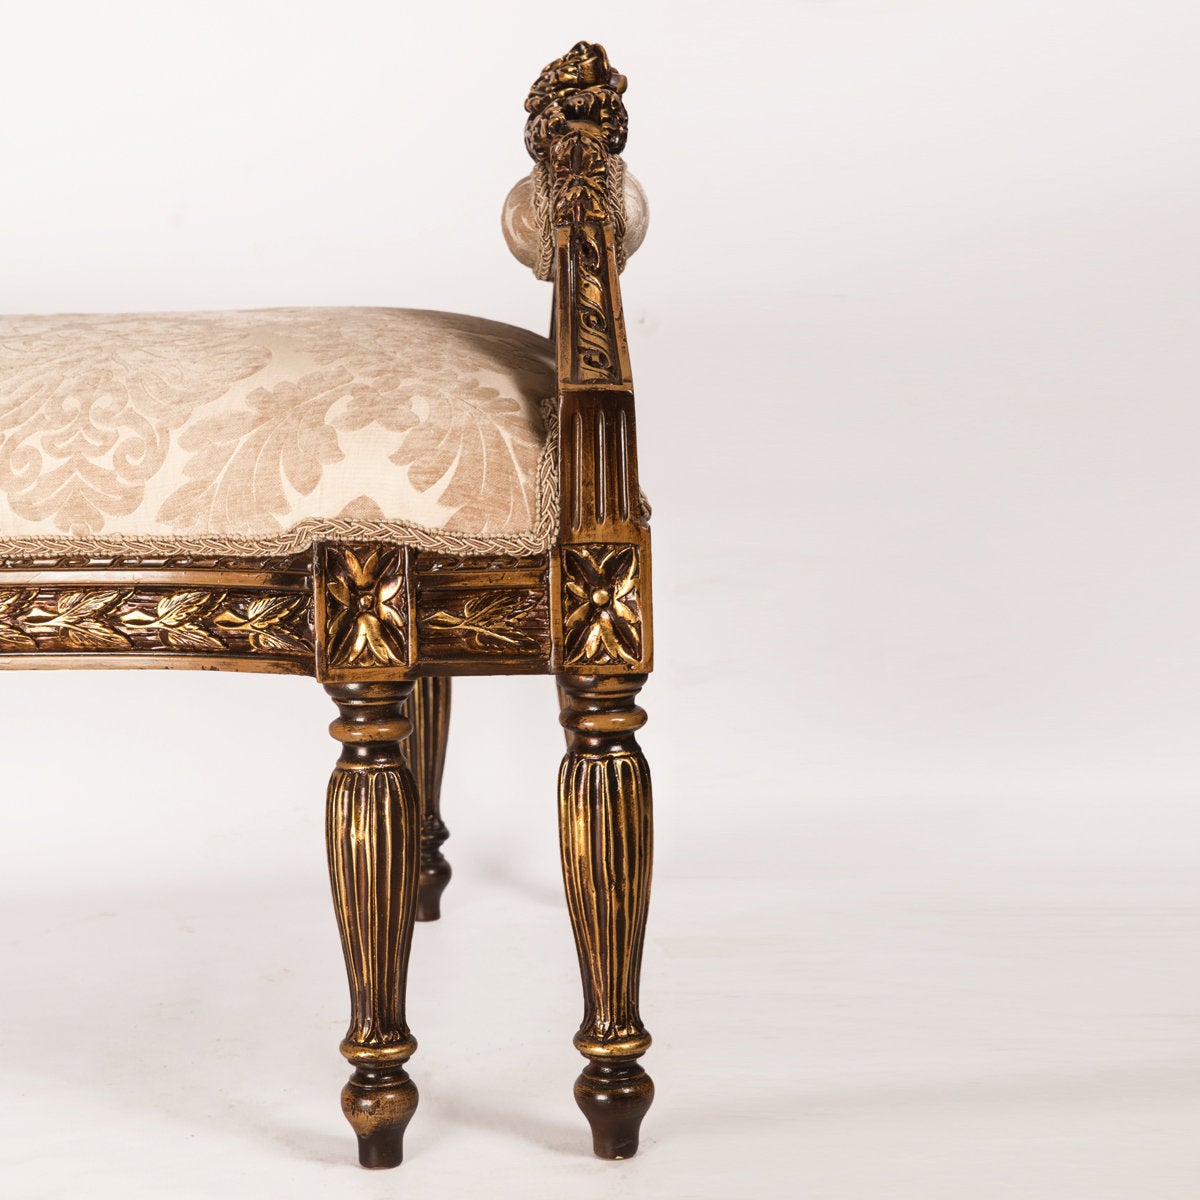 French rococo-style carved bench